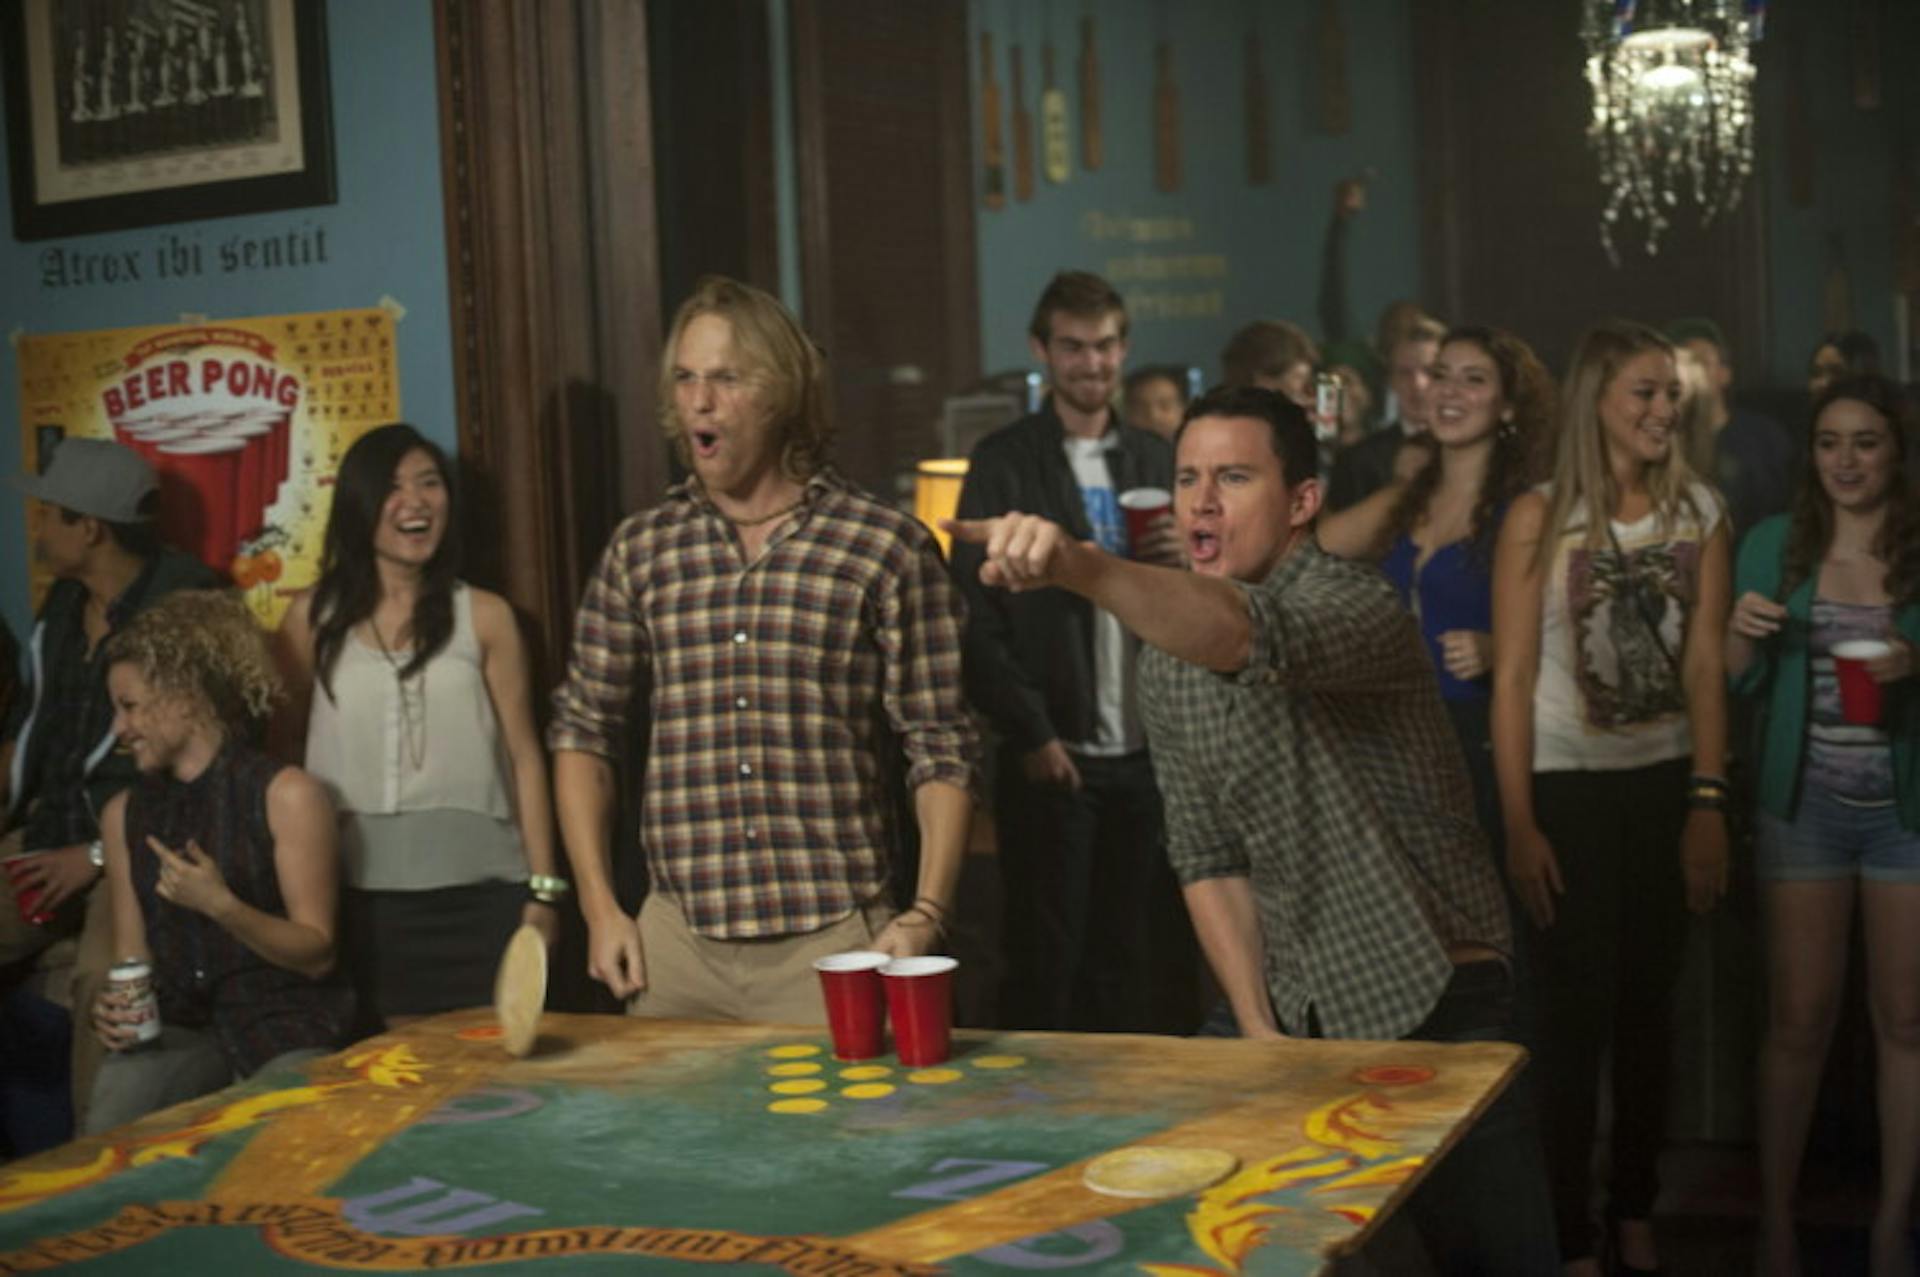 "Bro" at a college party. A still from the movie "22 Jump Street".